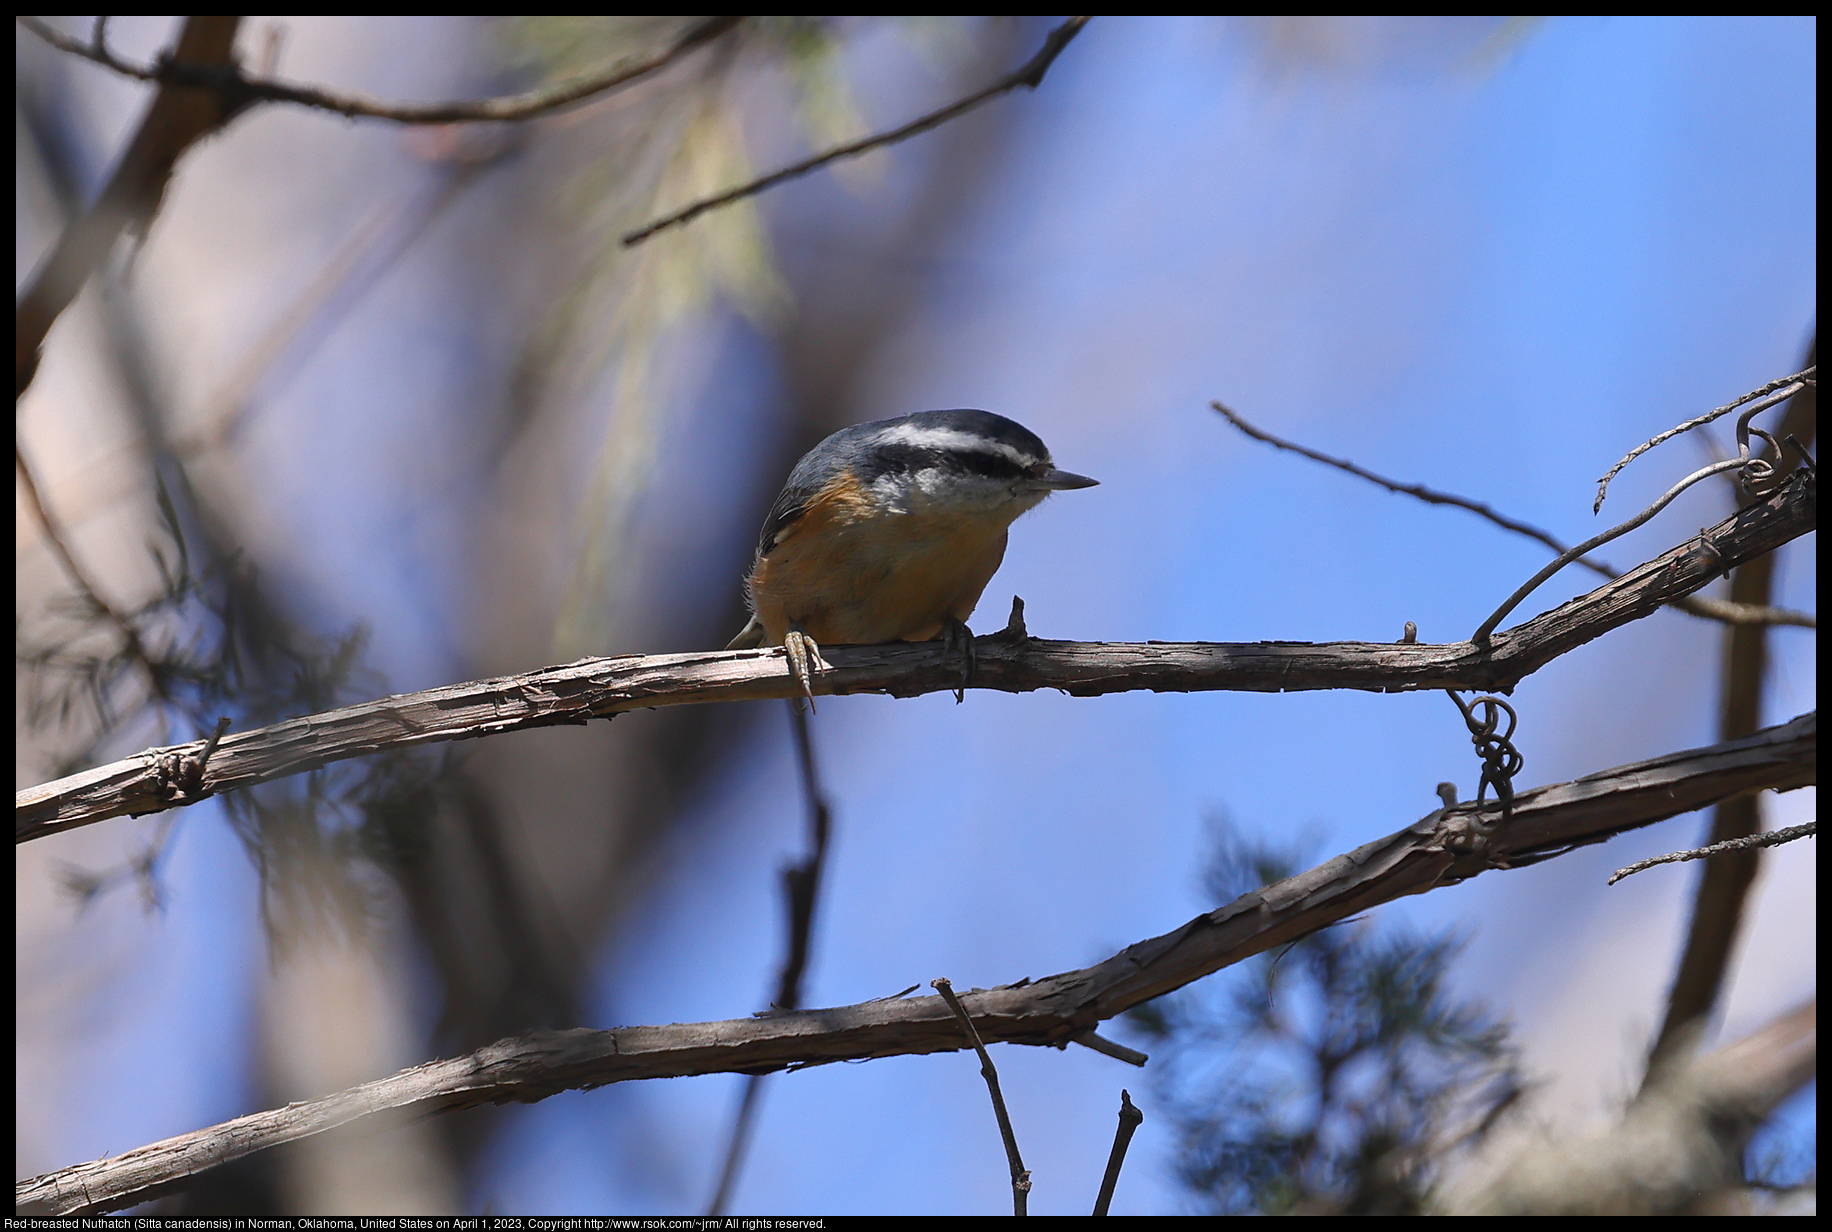 Red-breasted Nuthatch (Sitta canadensis) in Norman, Oklahoma, United States on April 1, 2023